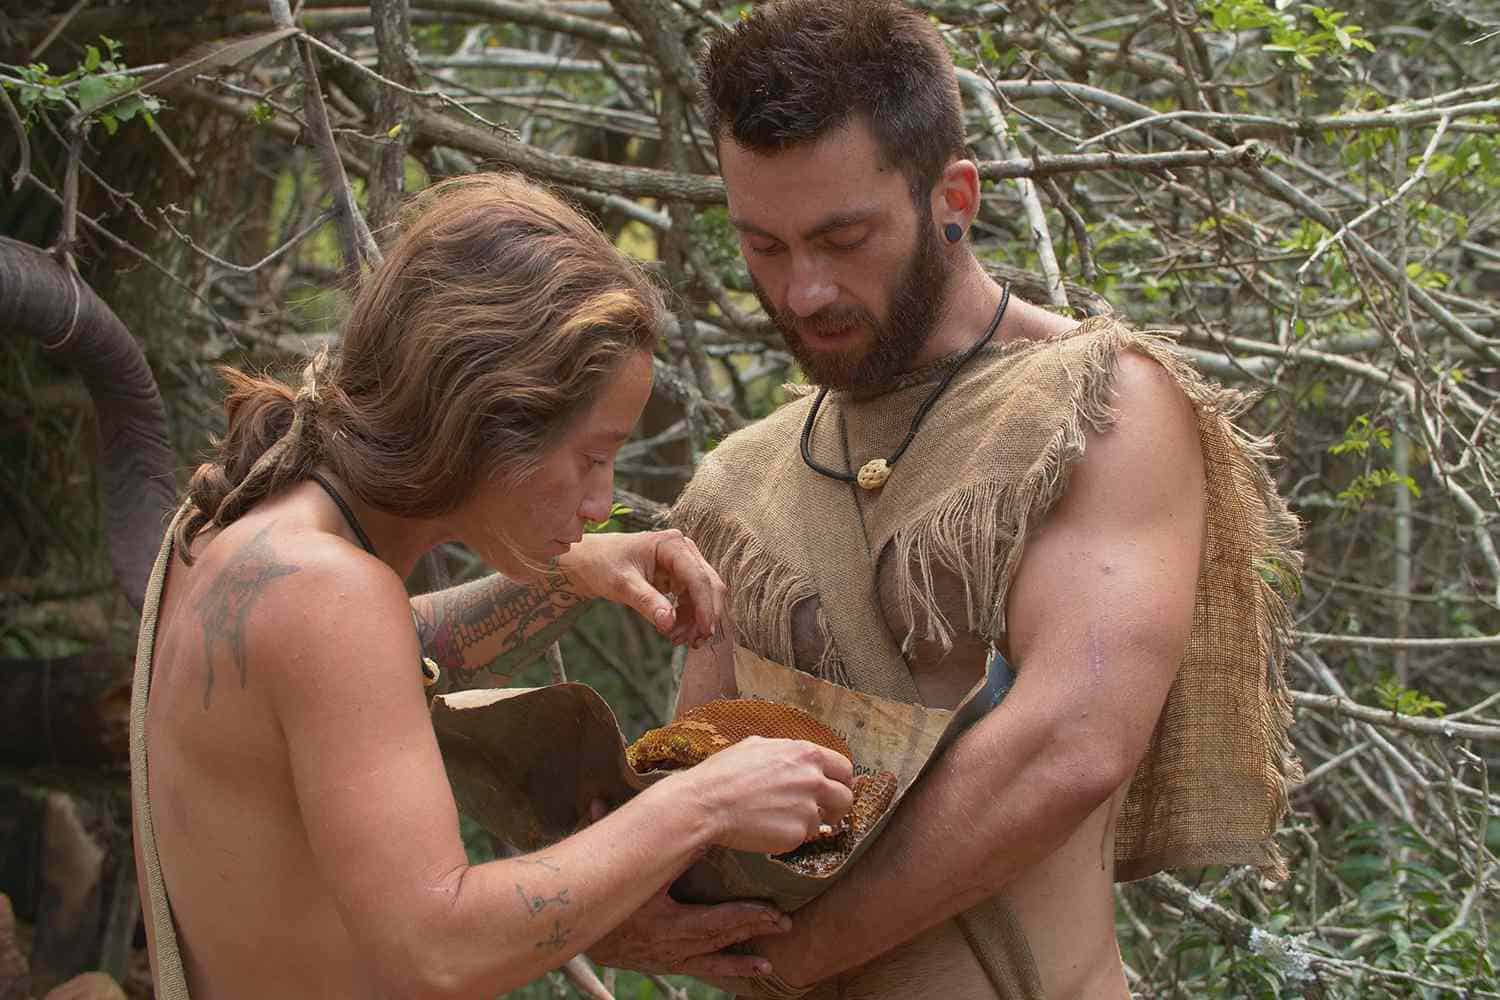 Naked and Afraid: Last One Standing Episode 7 Release Date